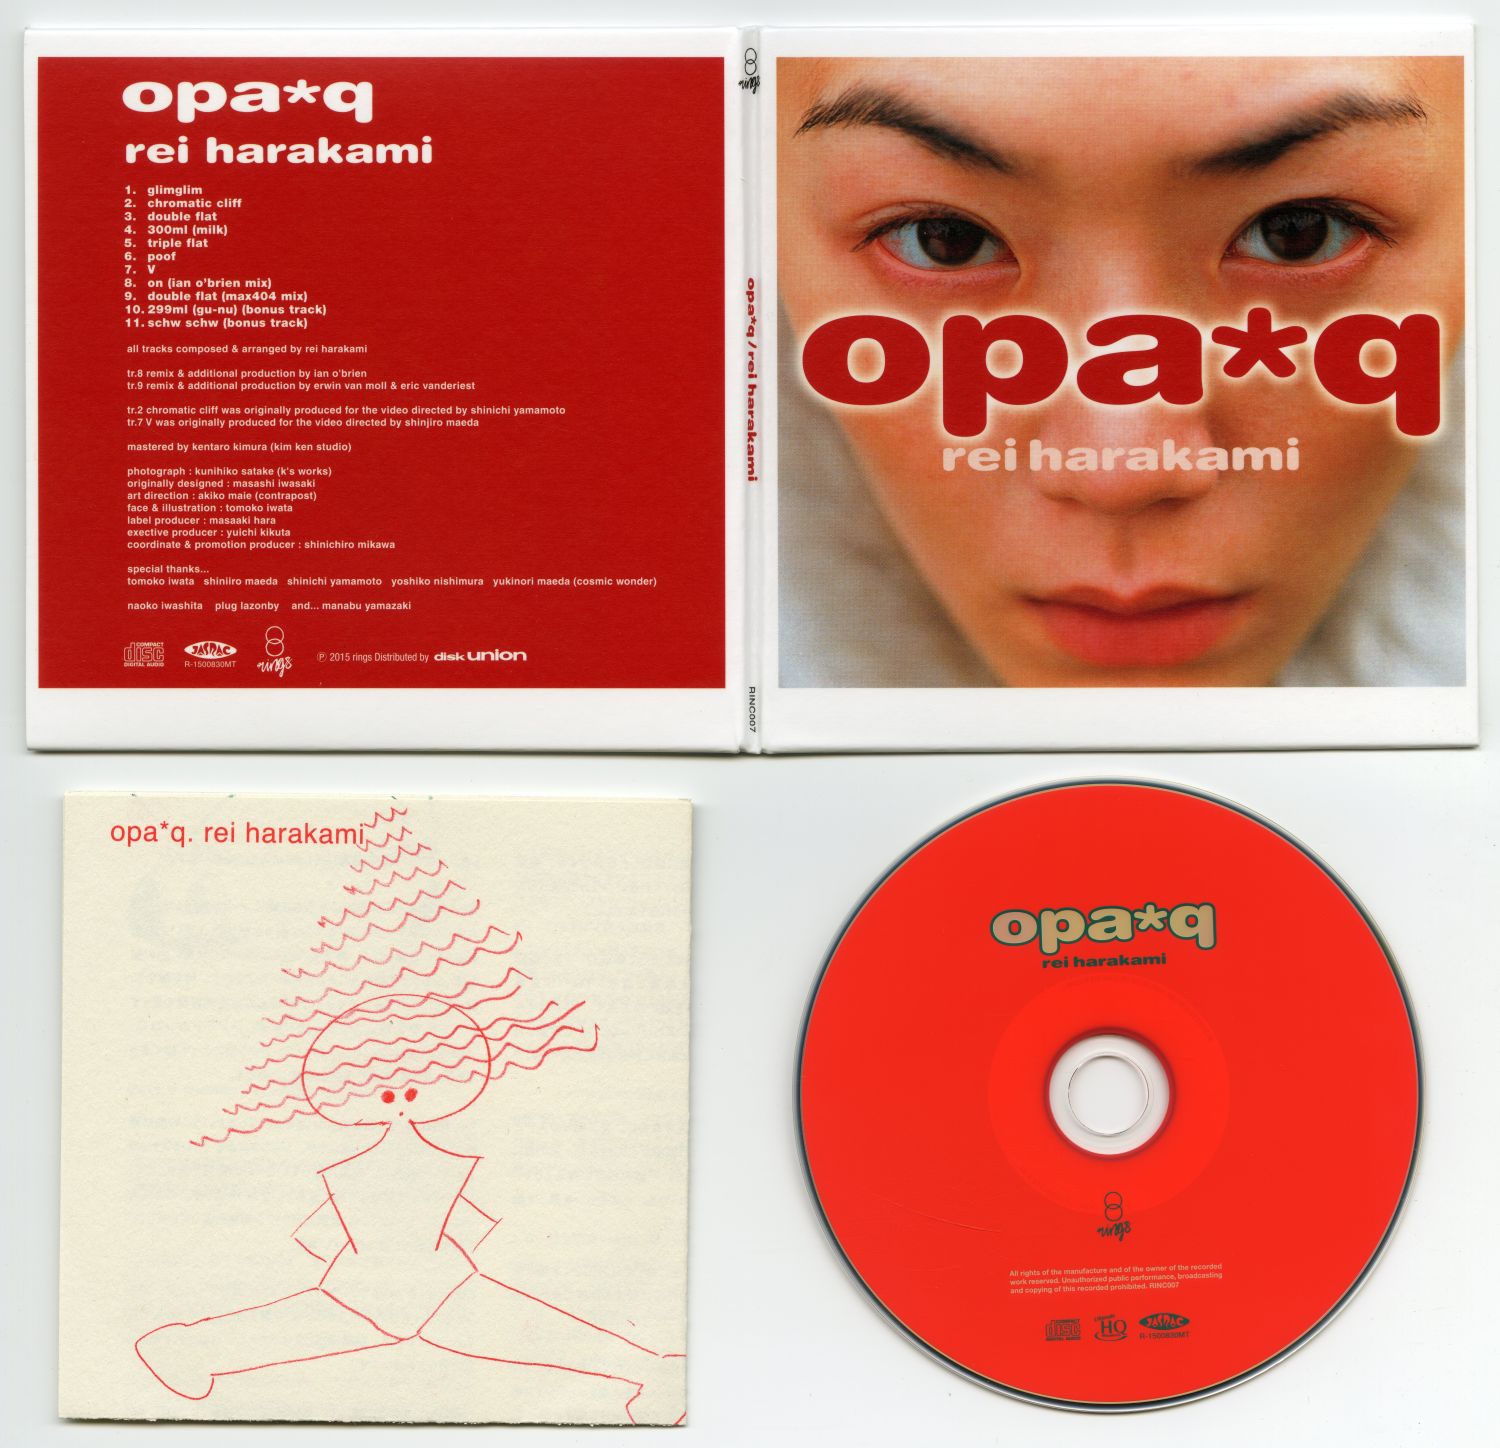 『Opa*q』（1999年、Sublime Records）の2015年版CD（Rings）